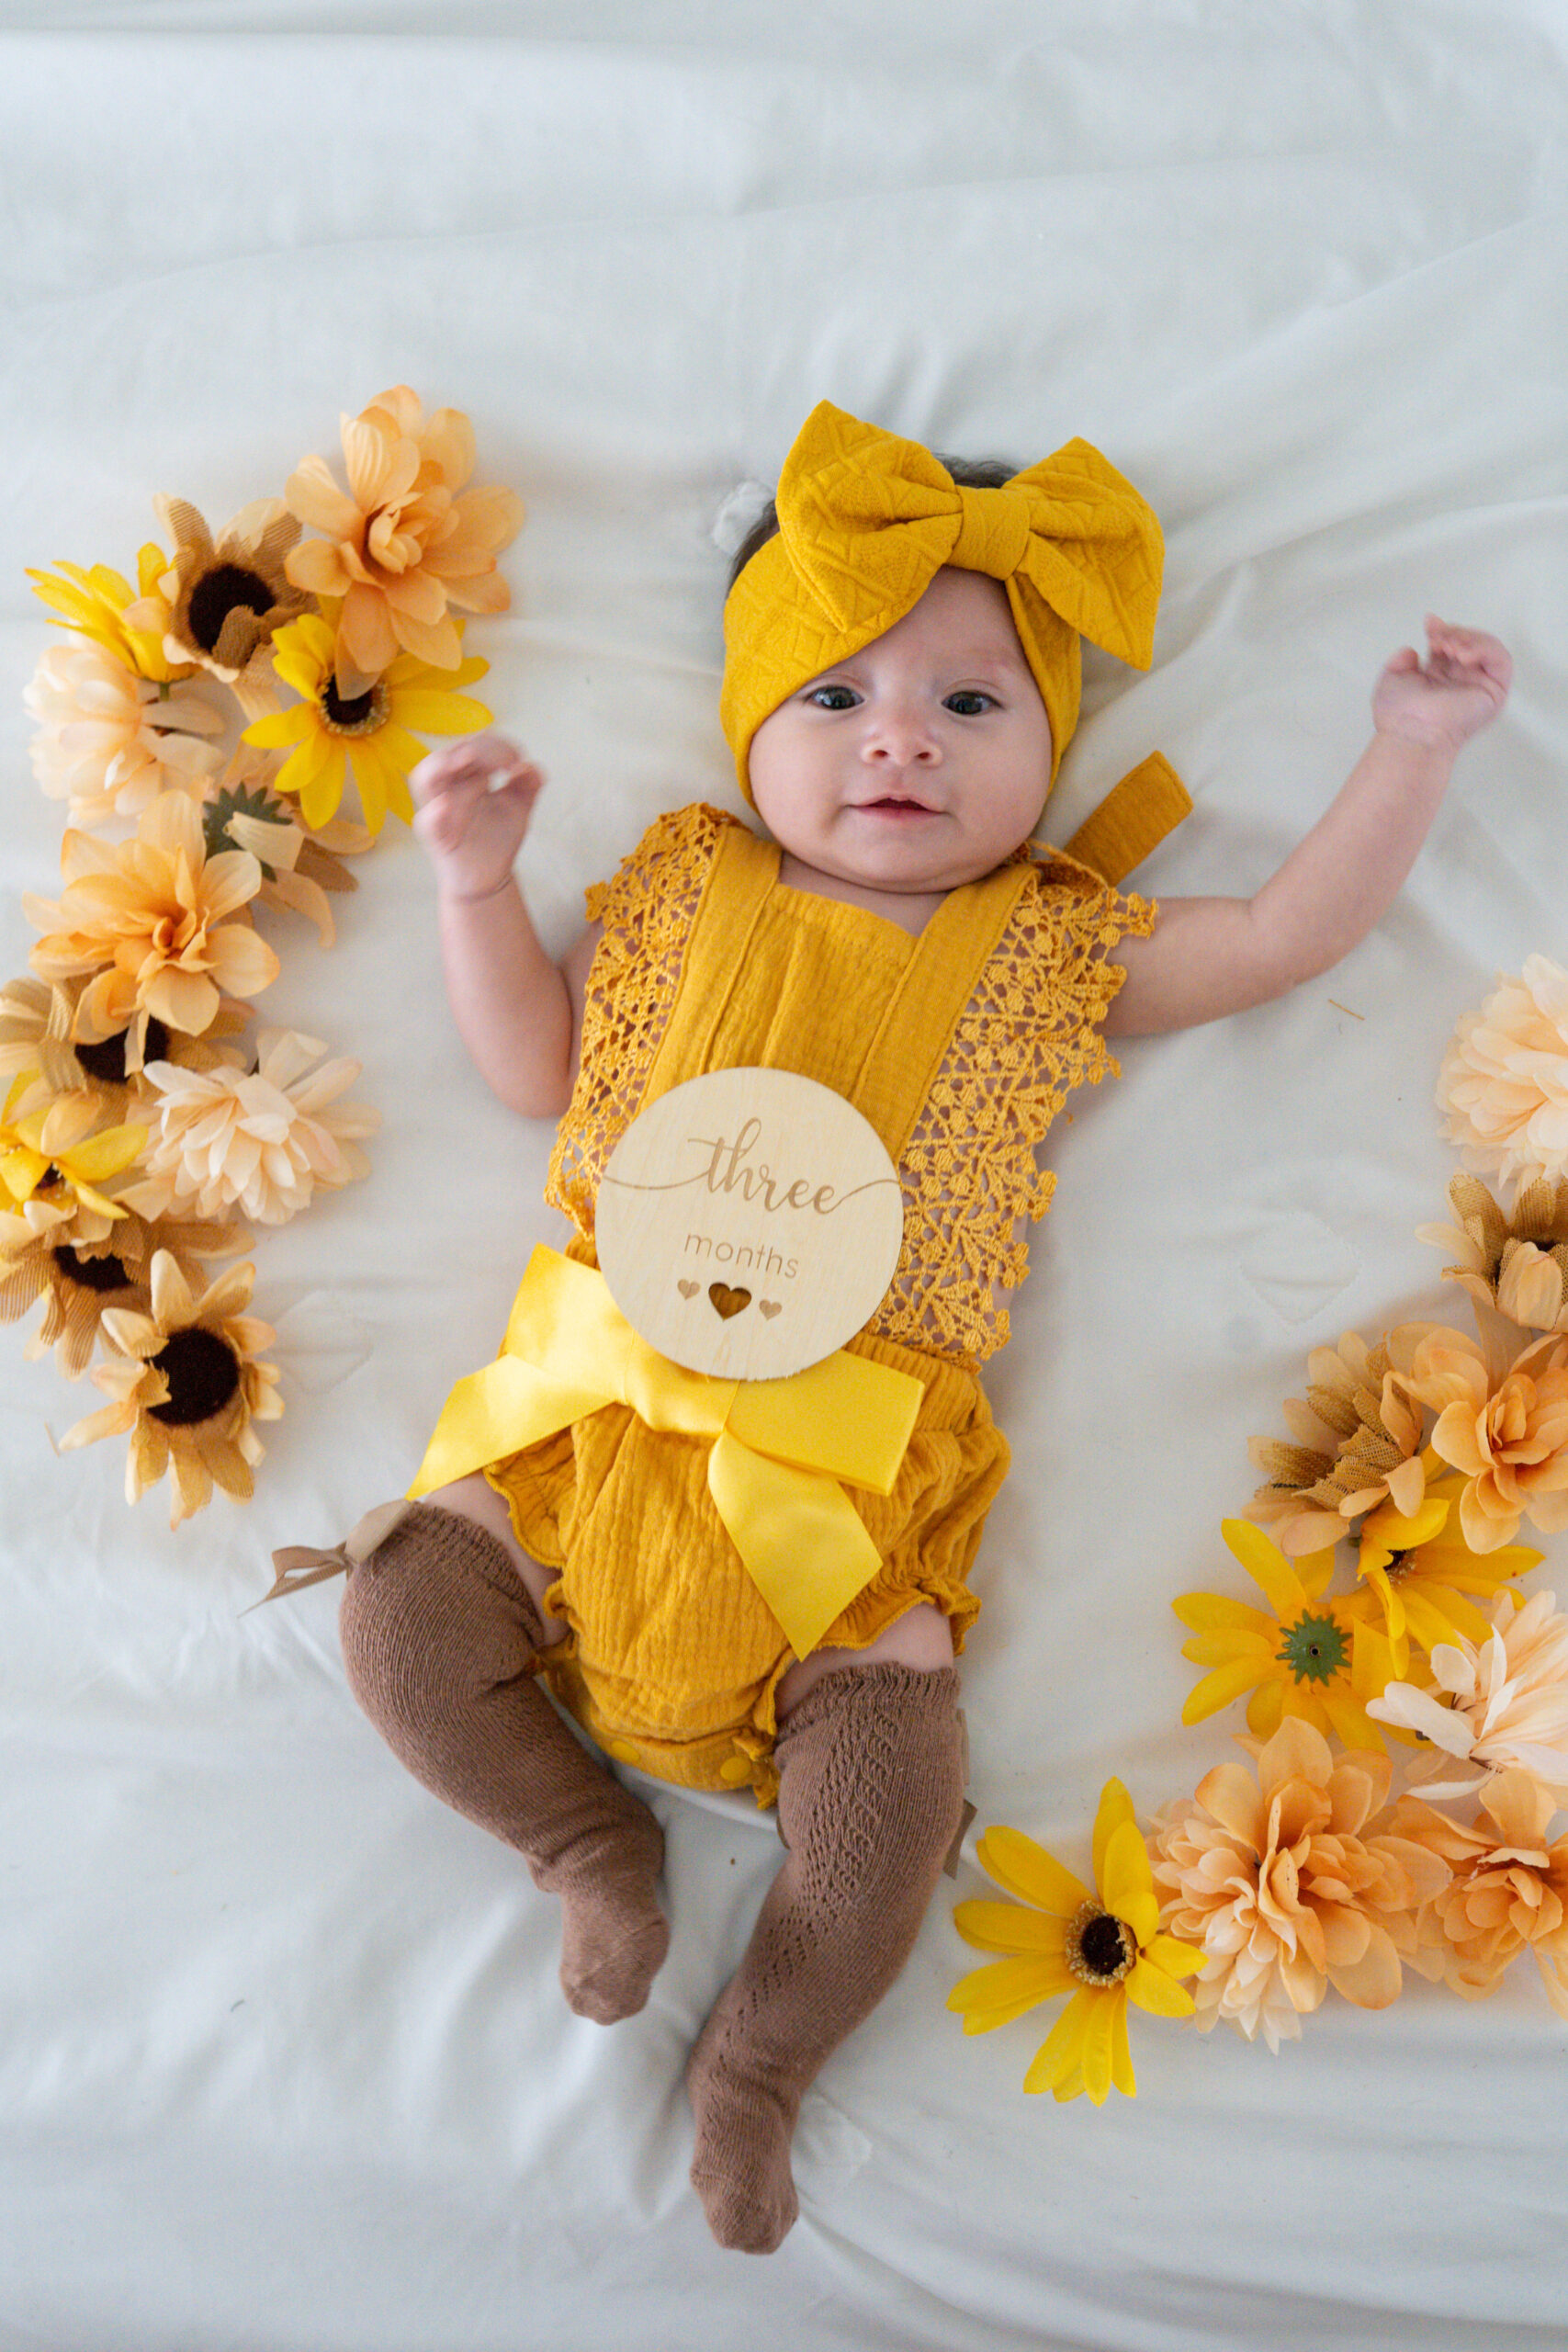 three months old, Baby girl fashion 